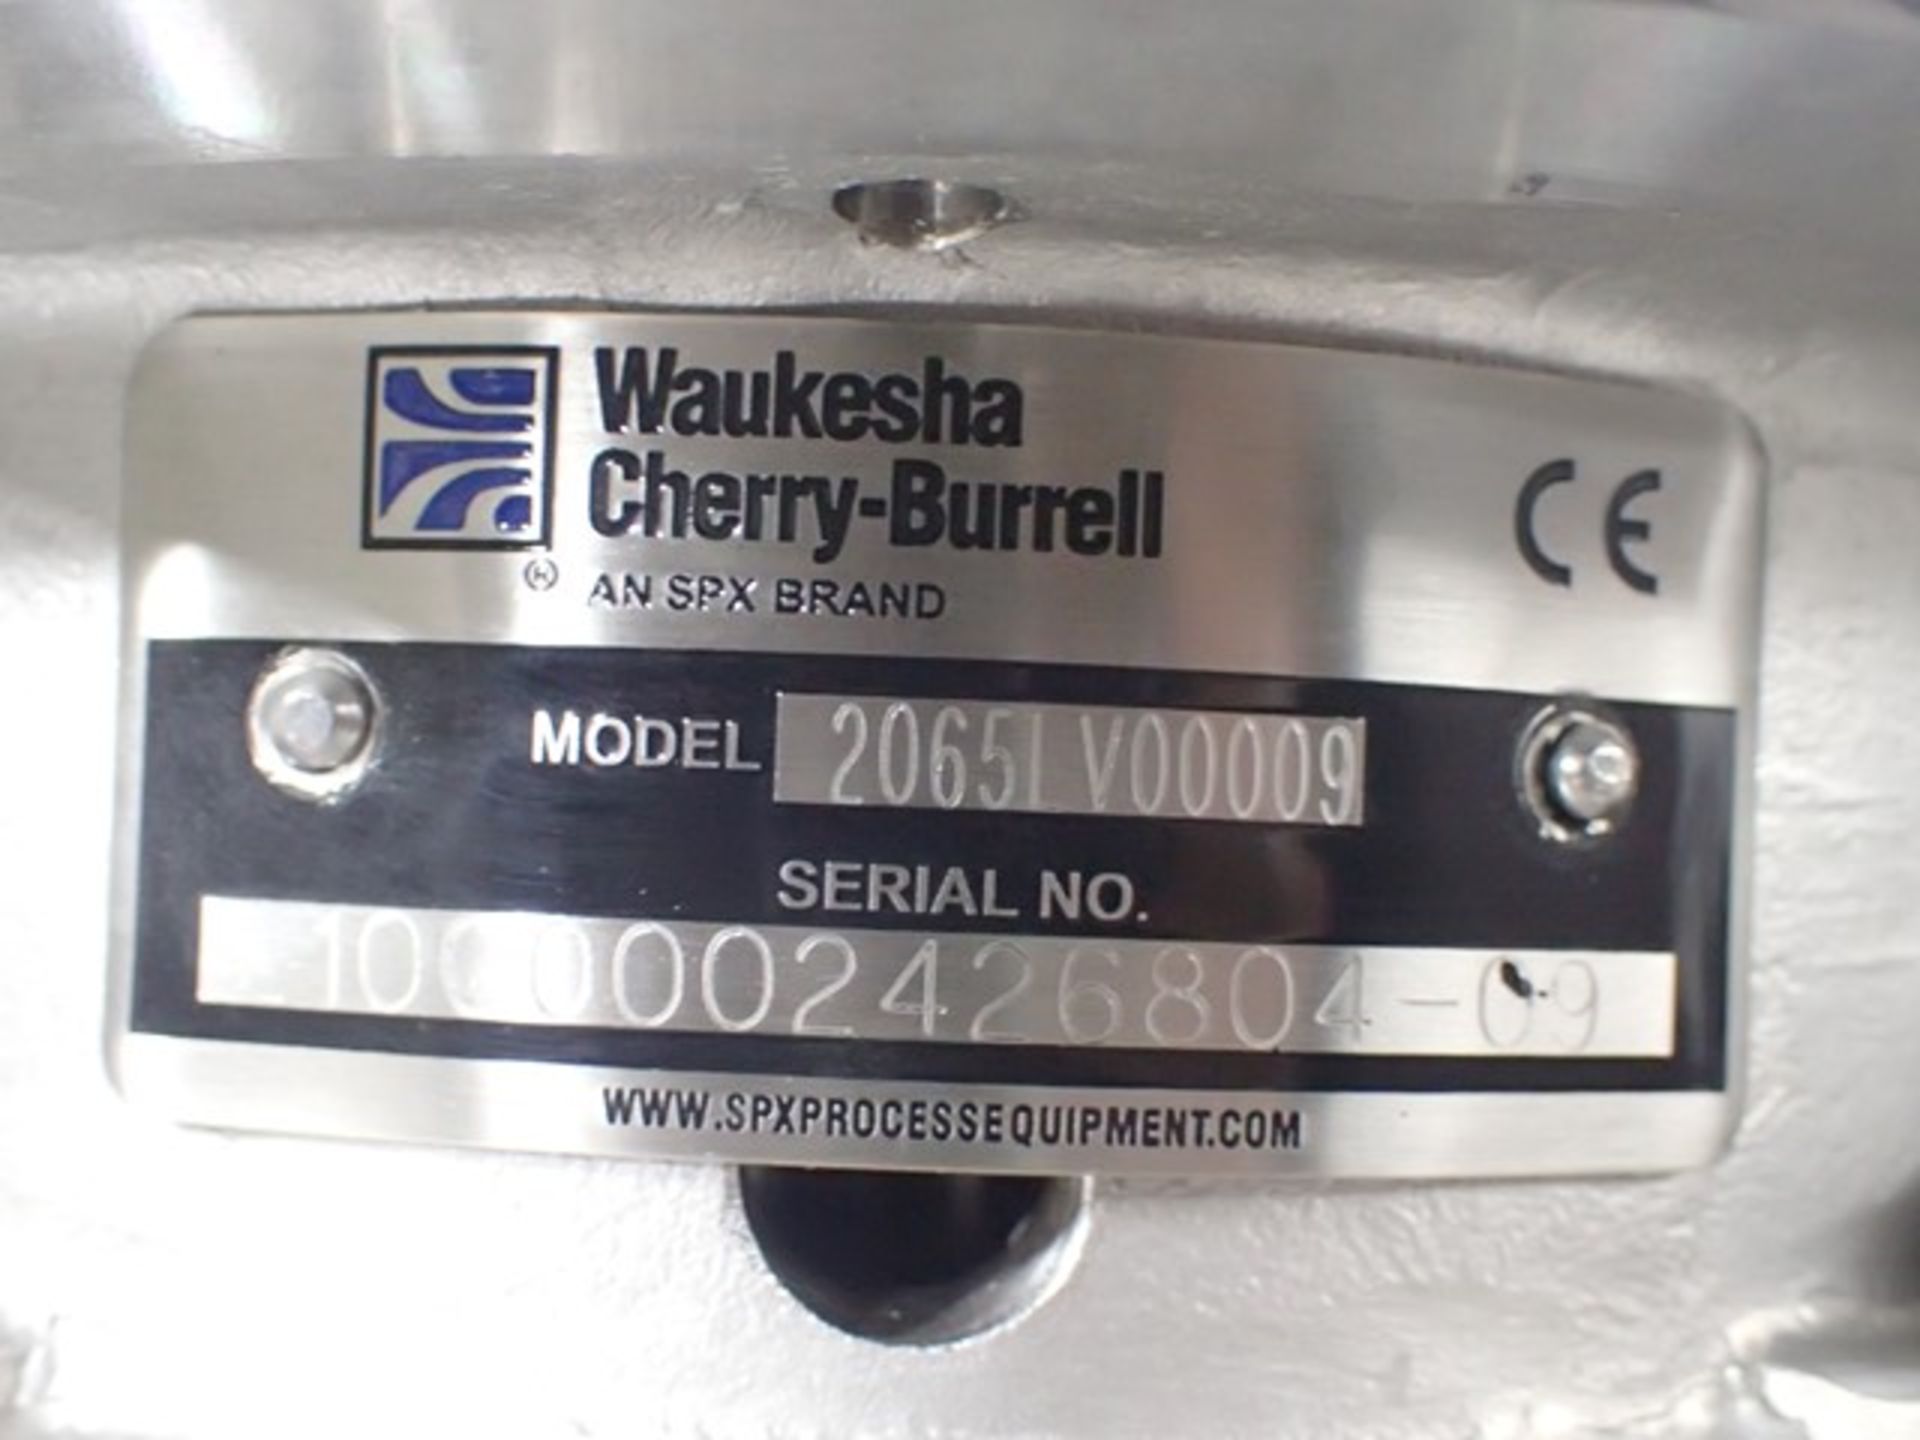 Waukesha centrifugal pump, model 2065LV00009, stainless steel construction, 1.5" x 1.5", 10 hp, - Image 8 of 8